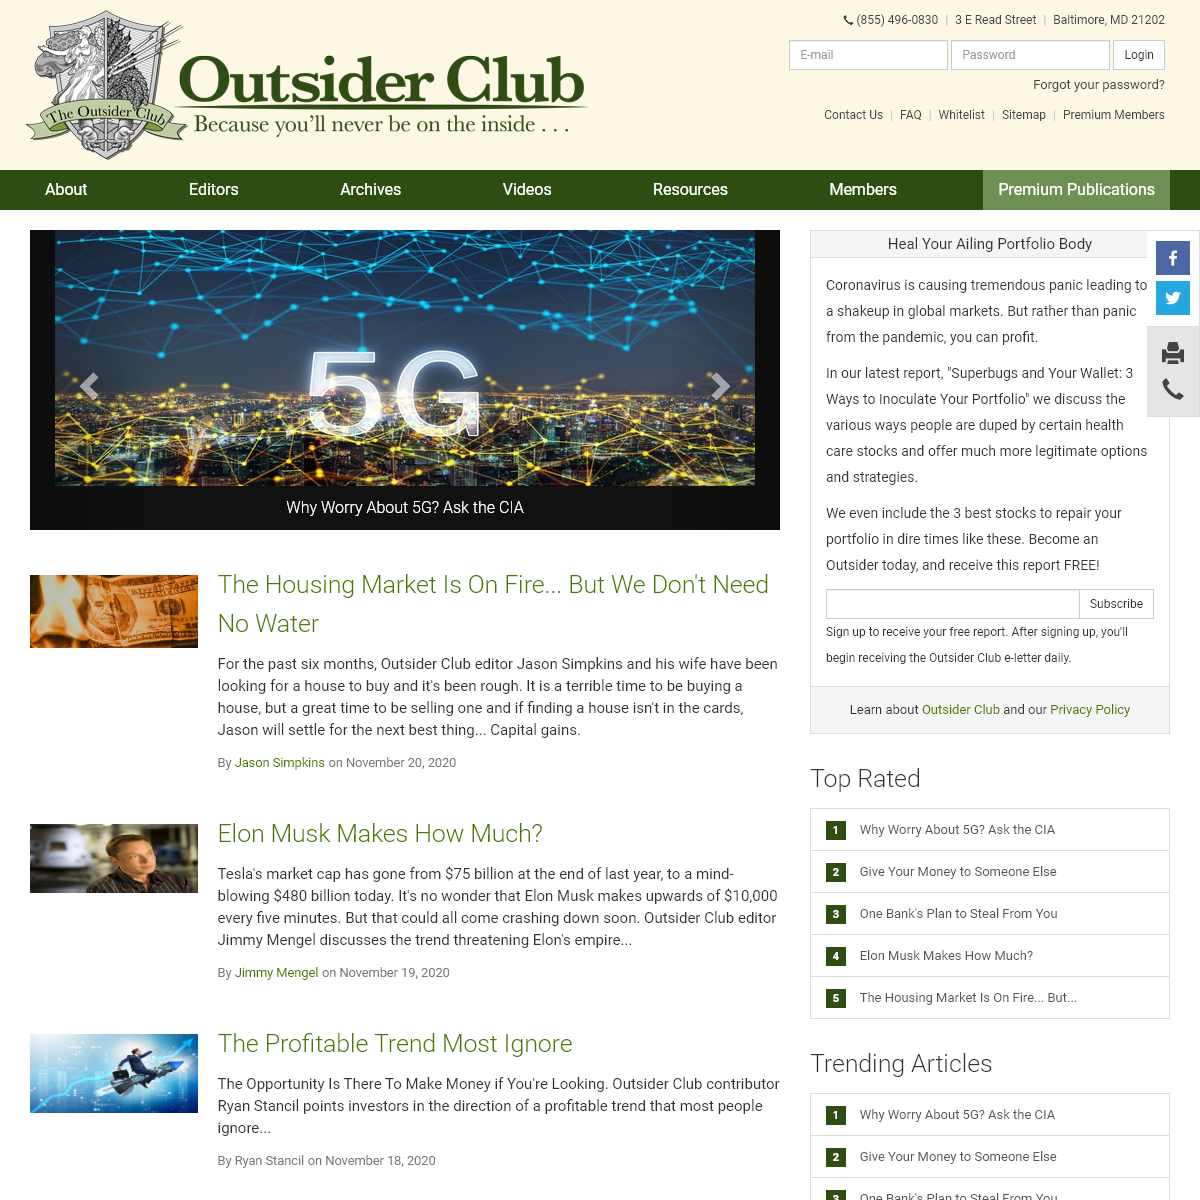 A complete backup of outsiderclub.com